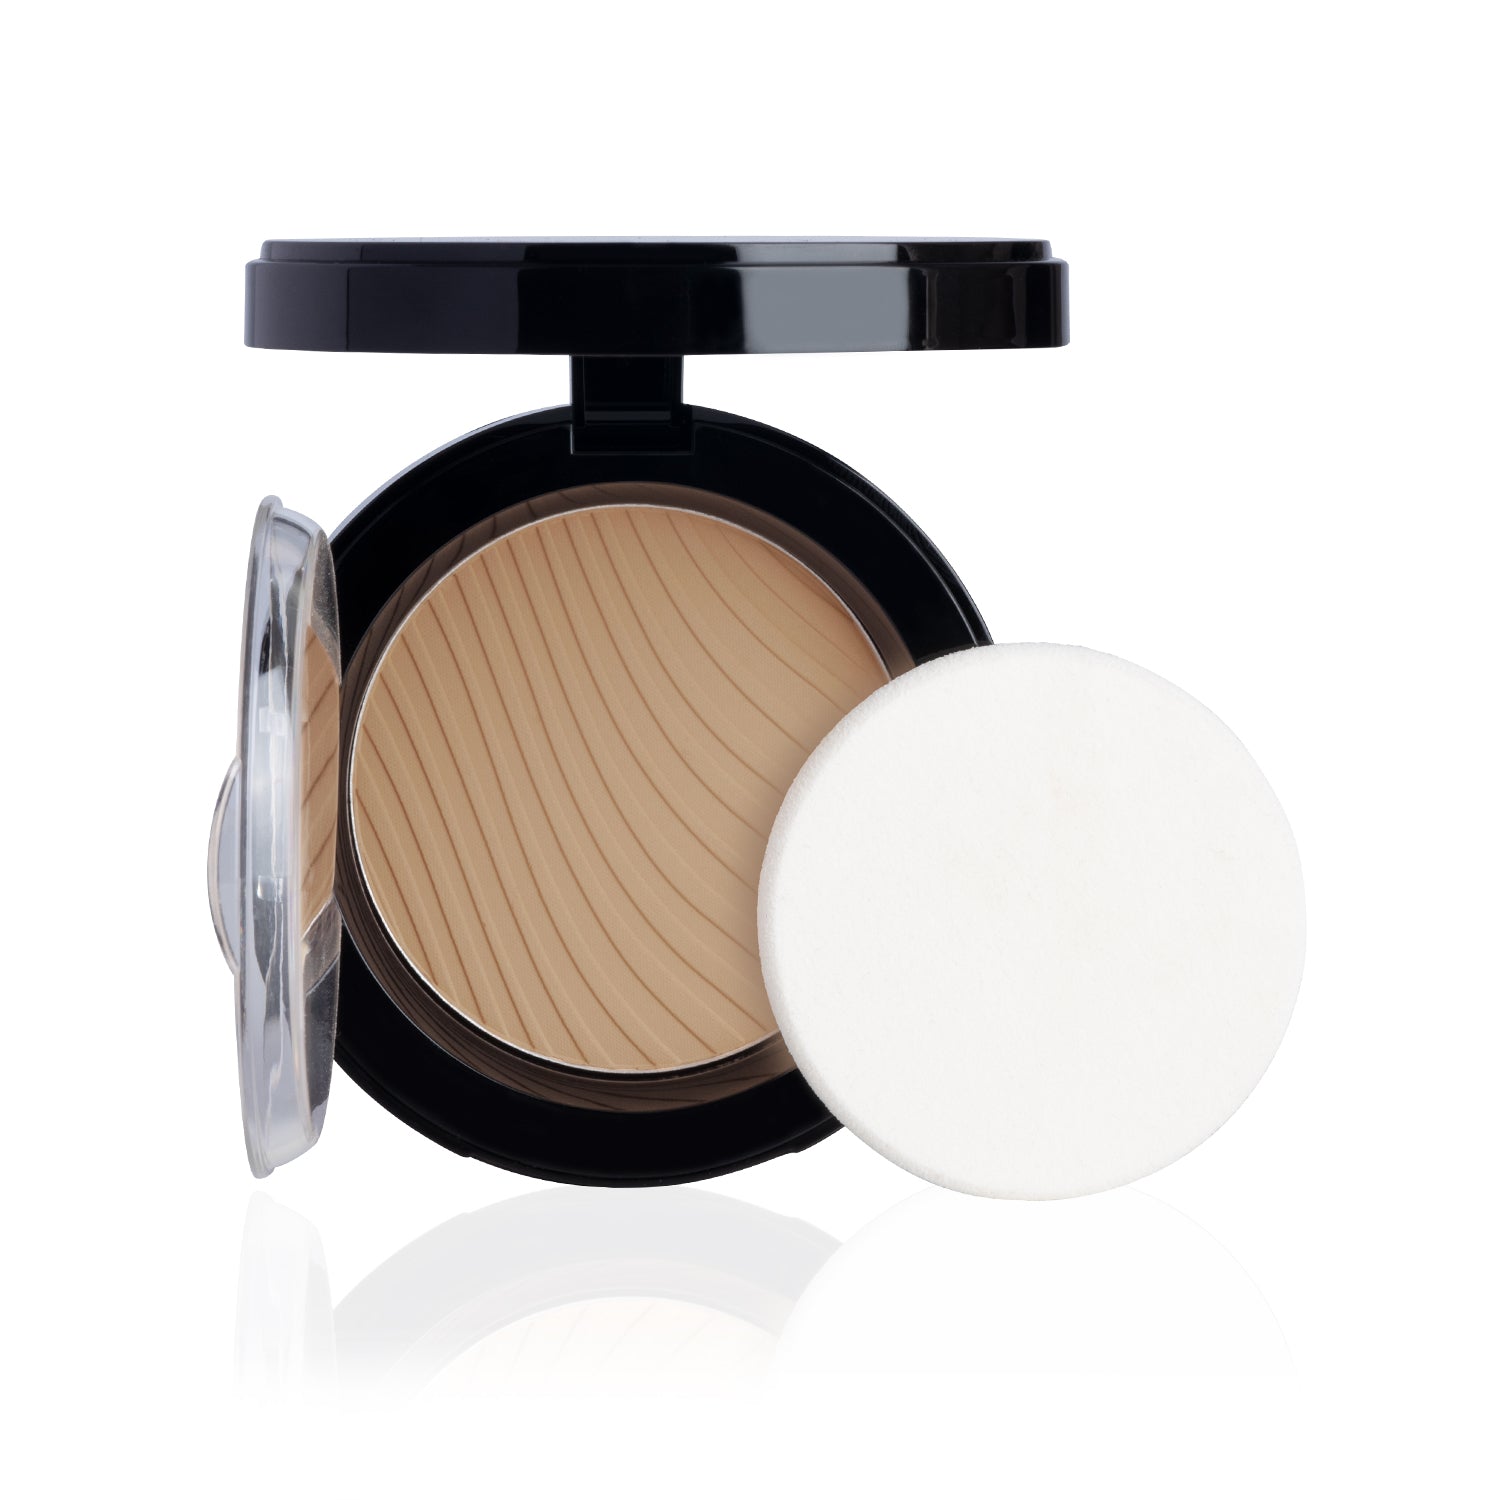 PAC Cosmetics Take Cover Compact Powder (7.85 gm) #Color_Toffee Trip